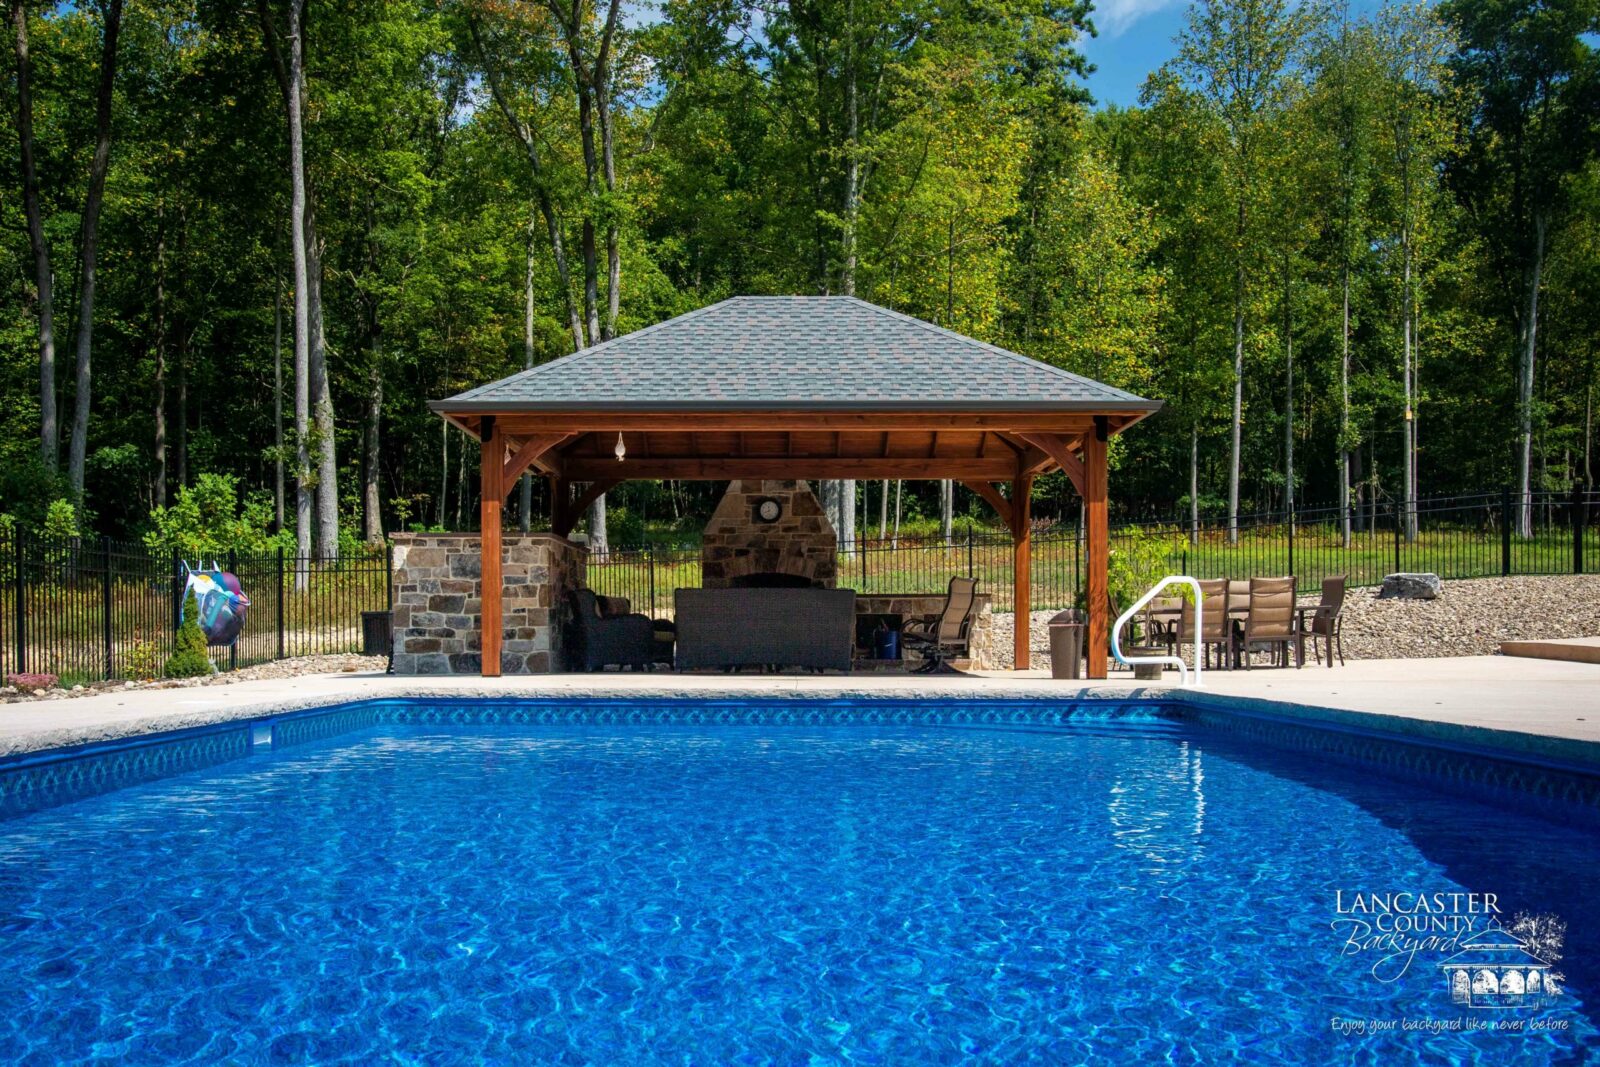 16x20 cheyenne outdoor wood pavilion with pool